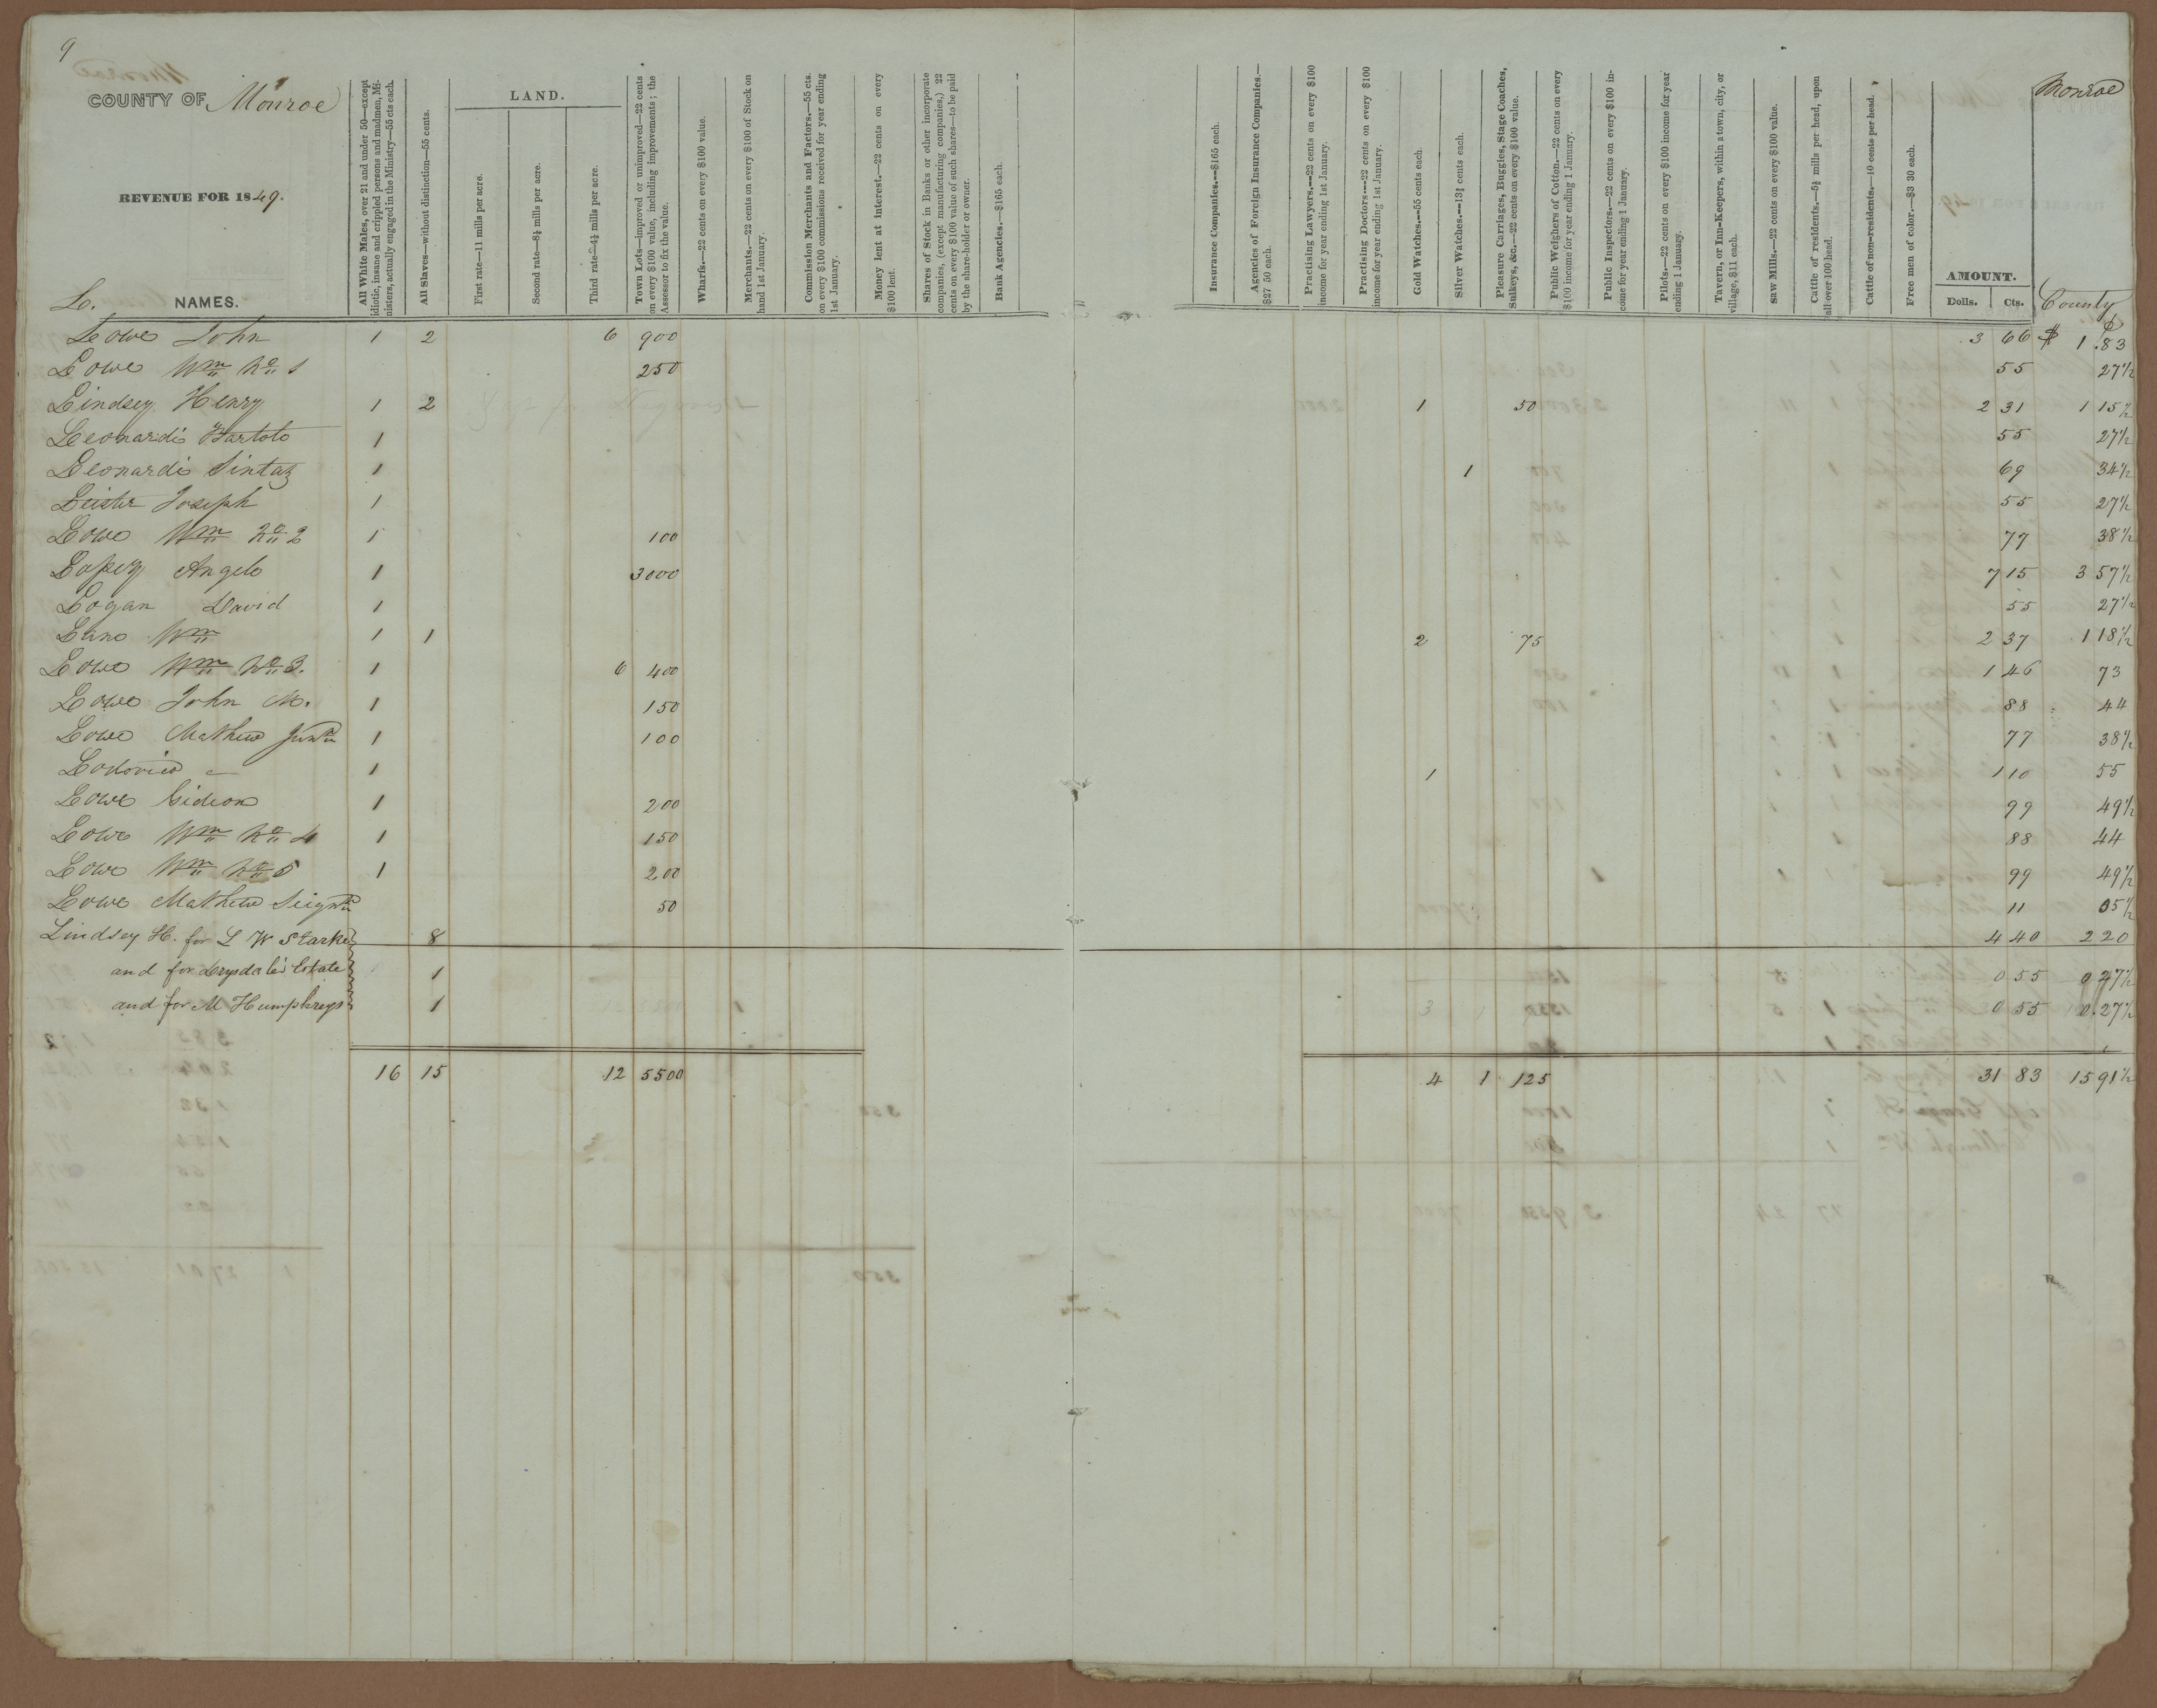 Florida County Tax Rolls, 1849 and 1850